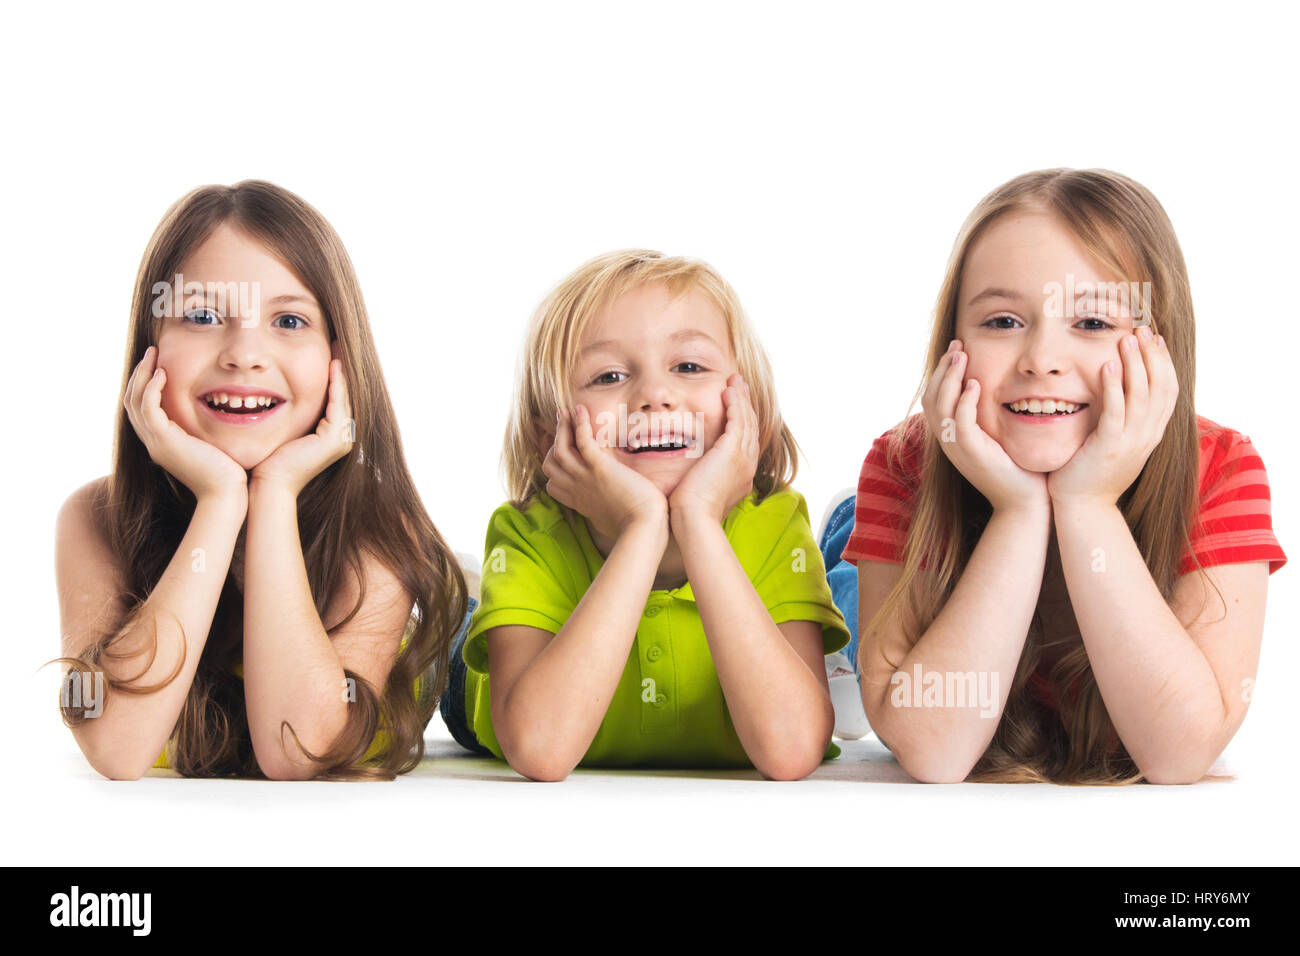 Happy smiling three children in colorful clothes laying on floor isolated on white background Stock Photo